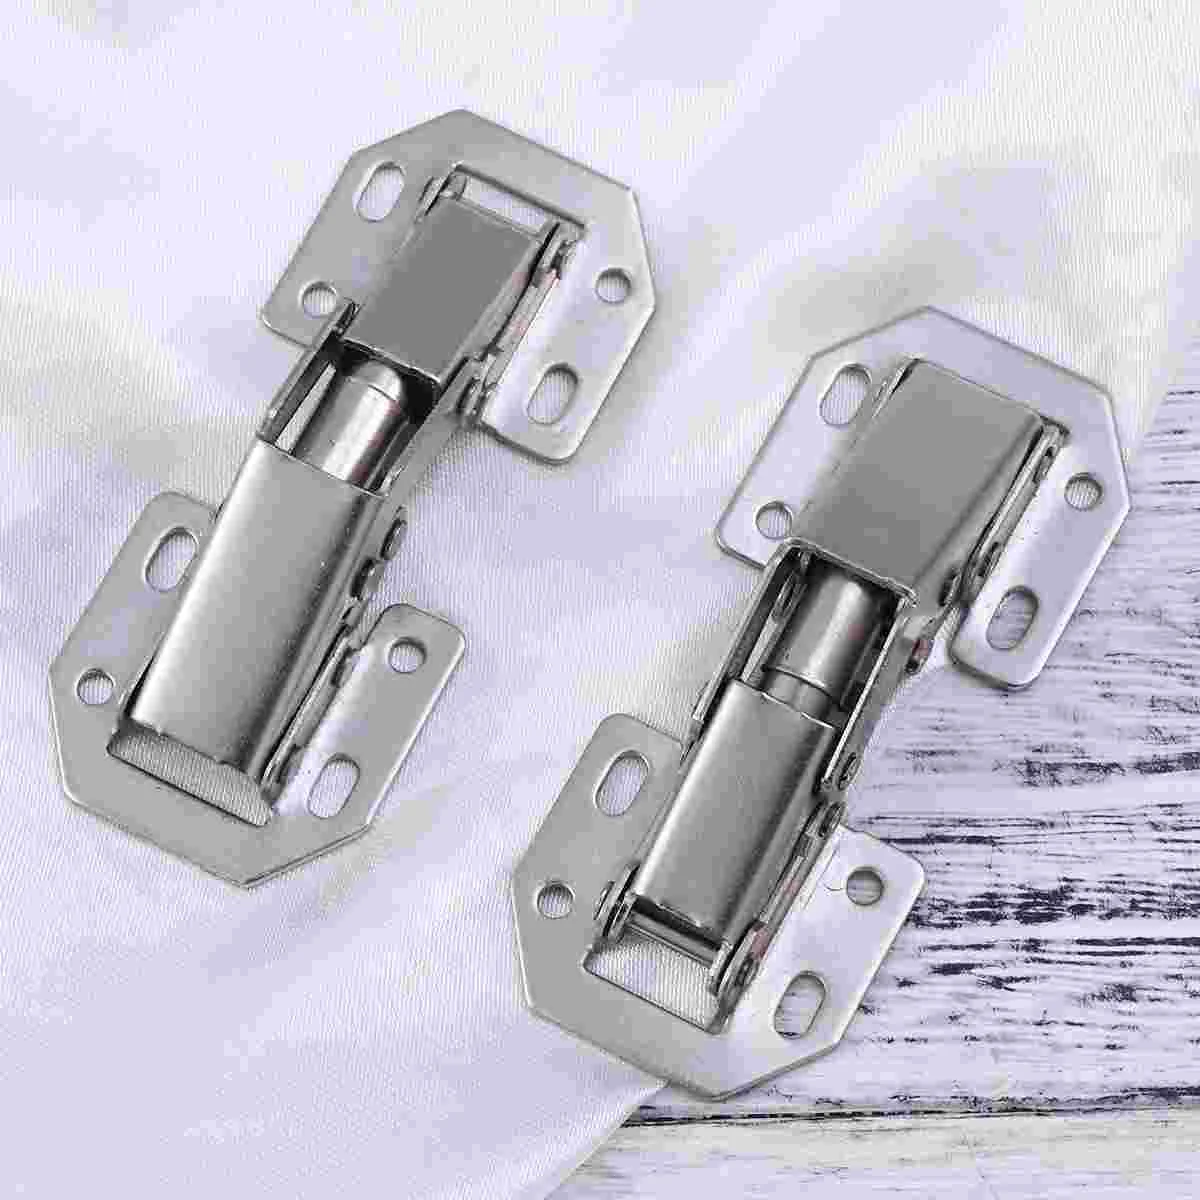 

5 PCS Heavy Duty Door Hinge Concealed Stainless Steel Hydraulic Furniture Hinges Pivot Fittings